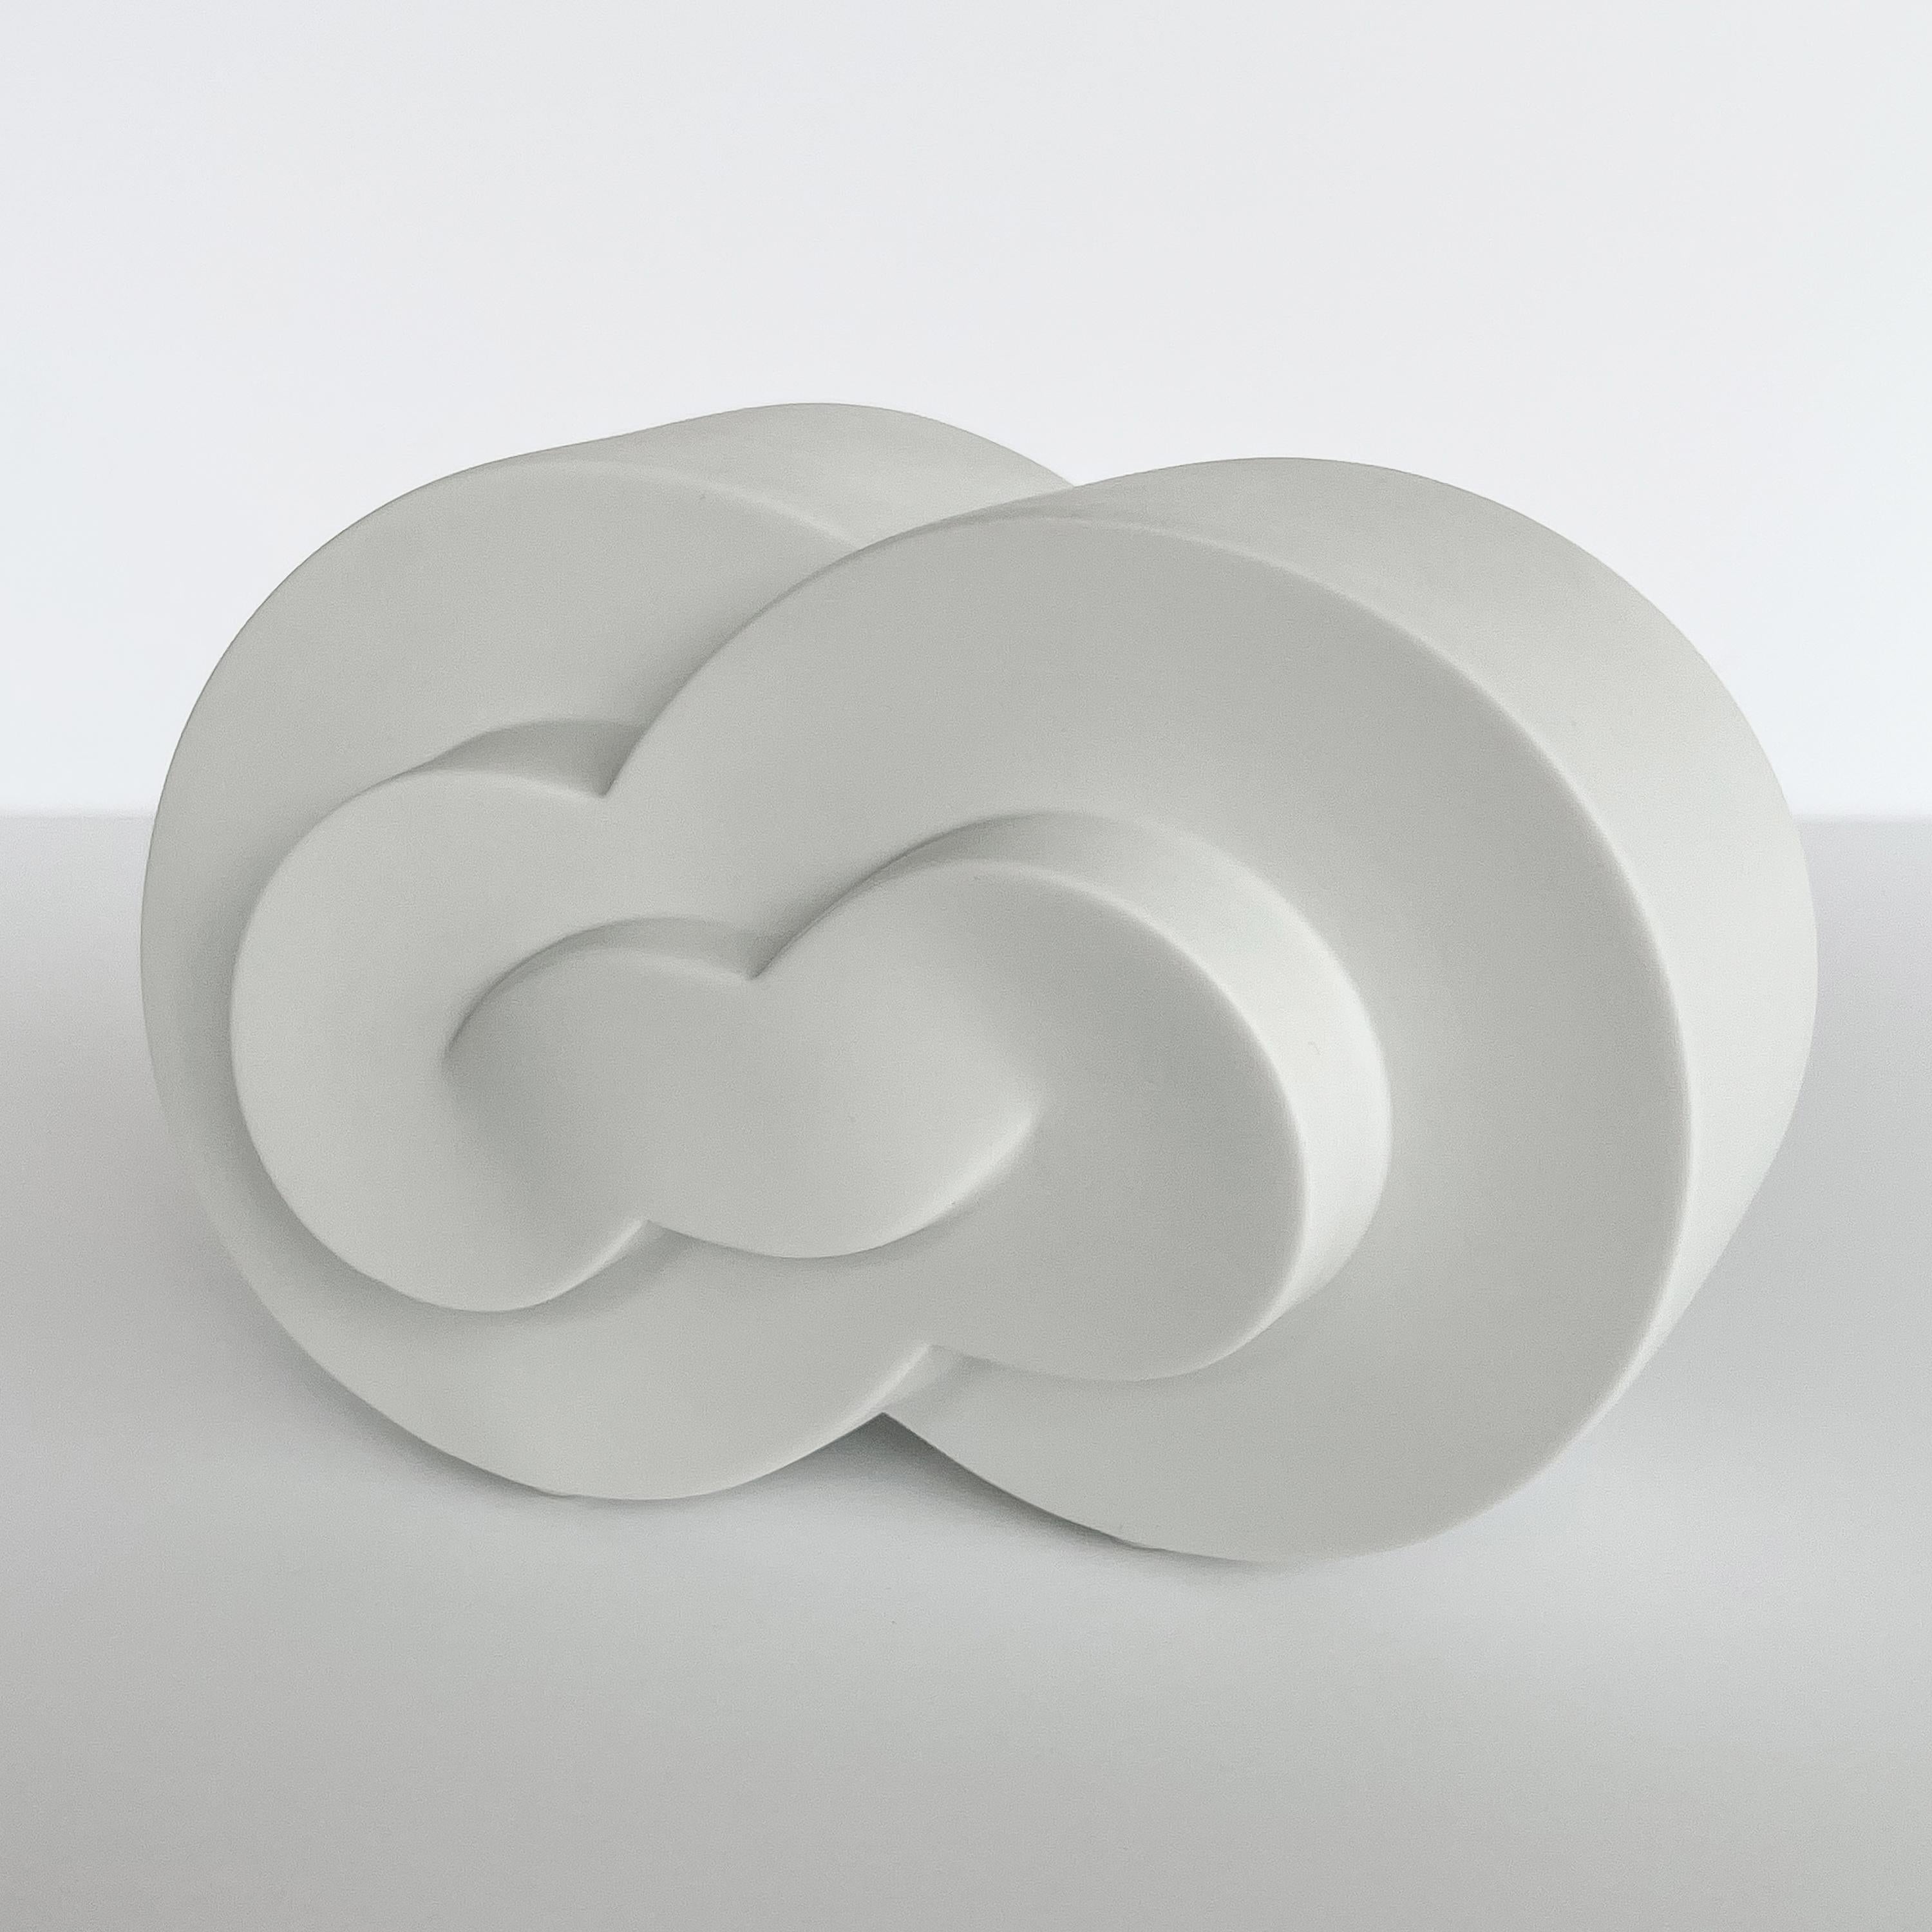 Natale Sapone Abstract Porcelain Sculpture for Rosenthal 8